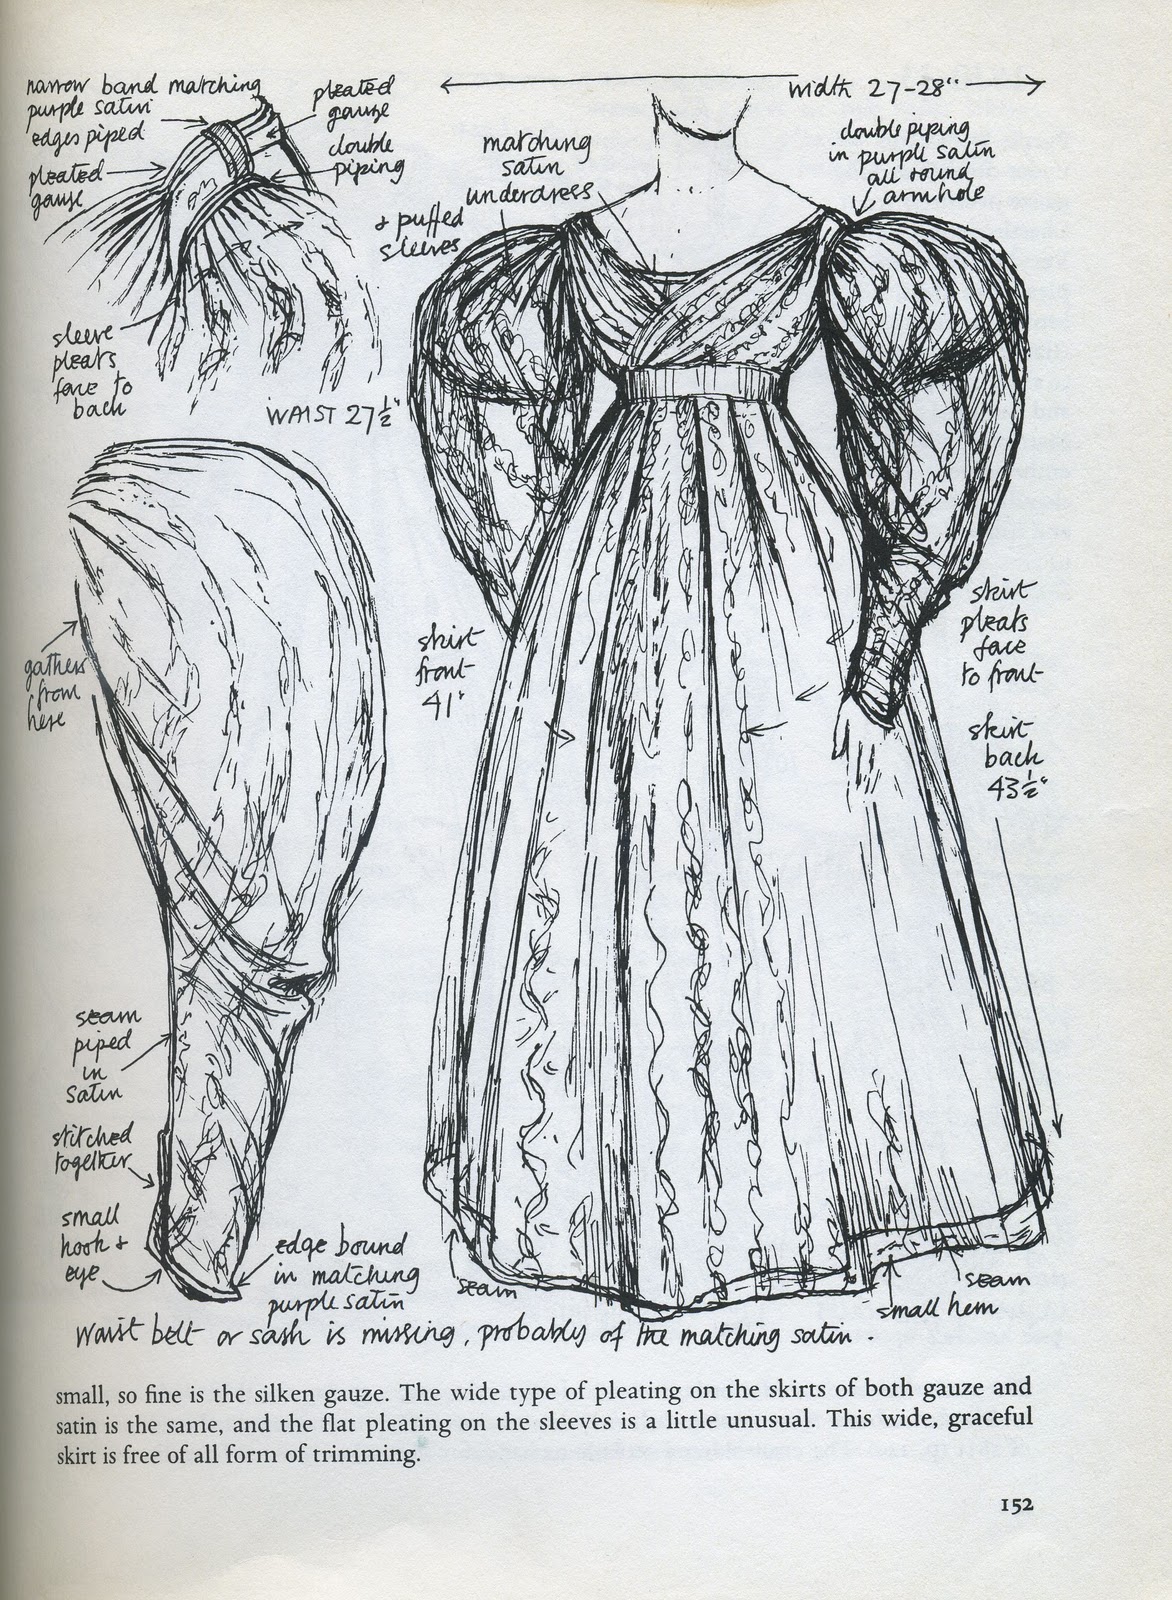 Emily Hudson - Costume Construction: Research - Initial Research